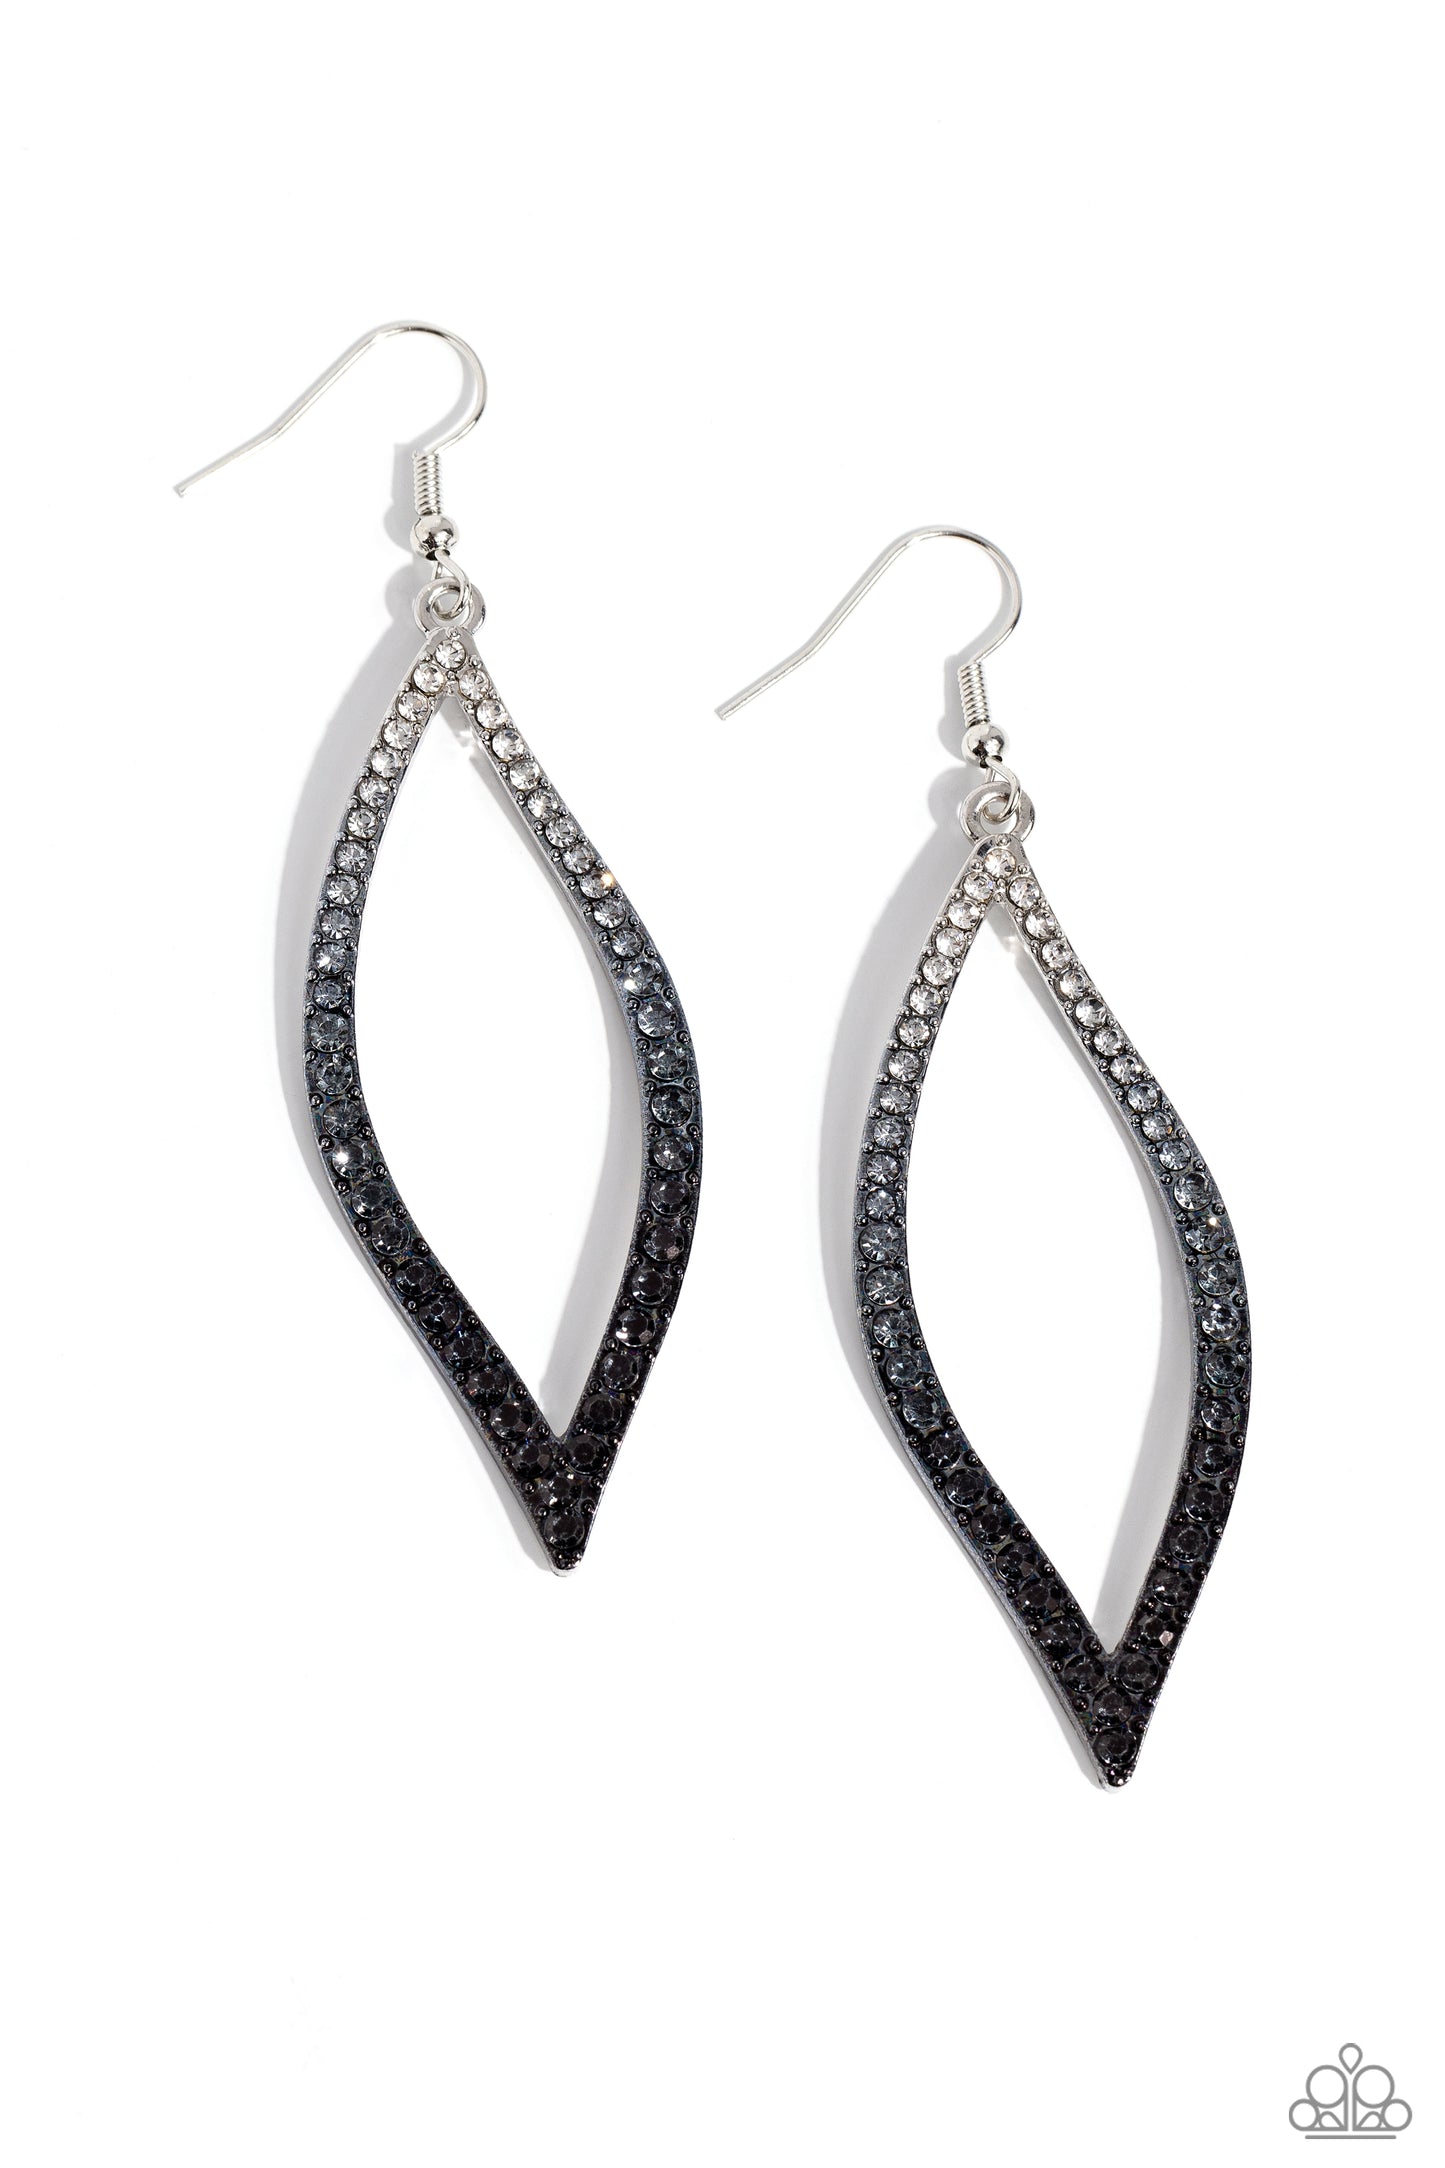 Admirable Asymmetry Black Ombre Earring - Paparazzi Accessories  A glistening asymmetrical silver teardrop frame is encrusted in glassy white rhinestones that gradually fade from gray to black, creating a colorful ombre effect for a statement-making look. Earring attaches to a standard fishhook fitting.  Sold as one pair of earrings.  P5SE-BKXX-342XX